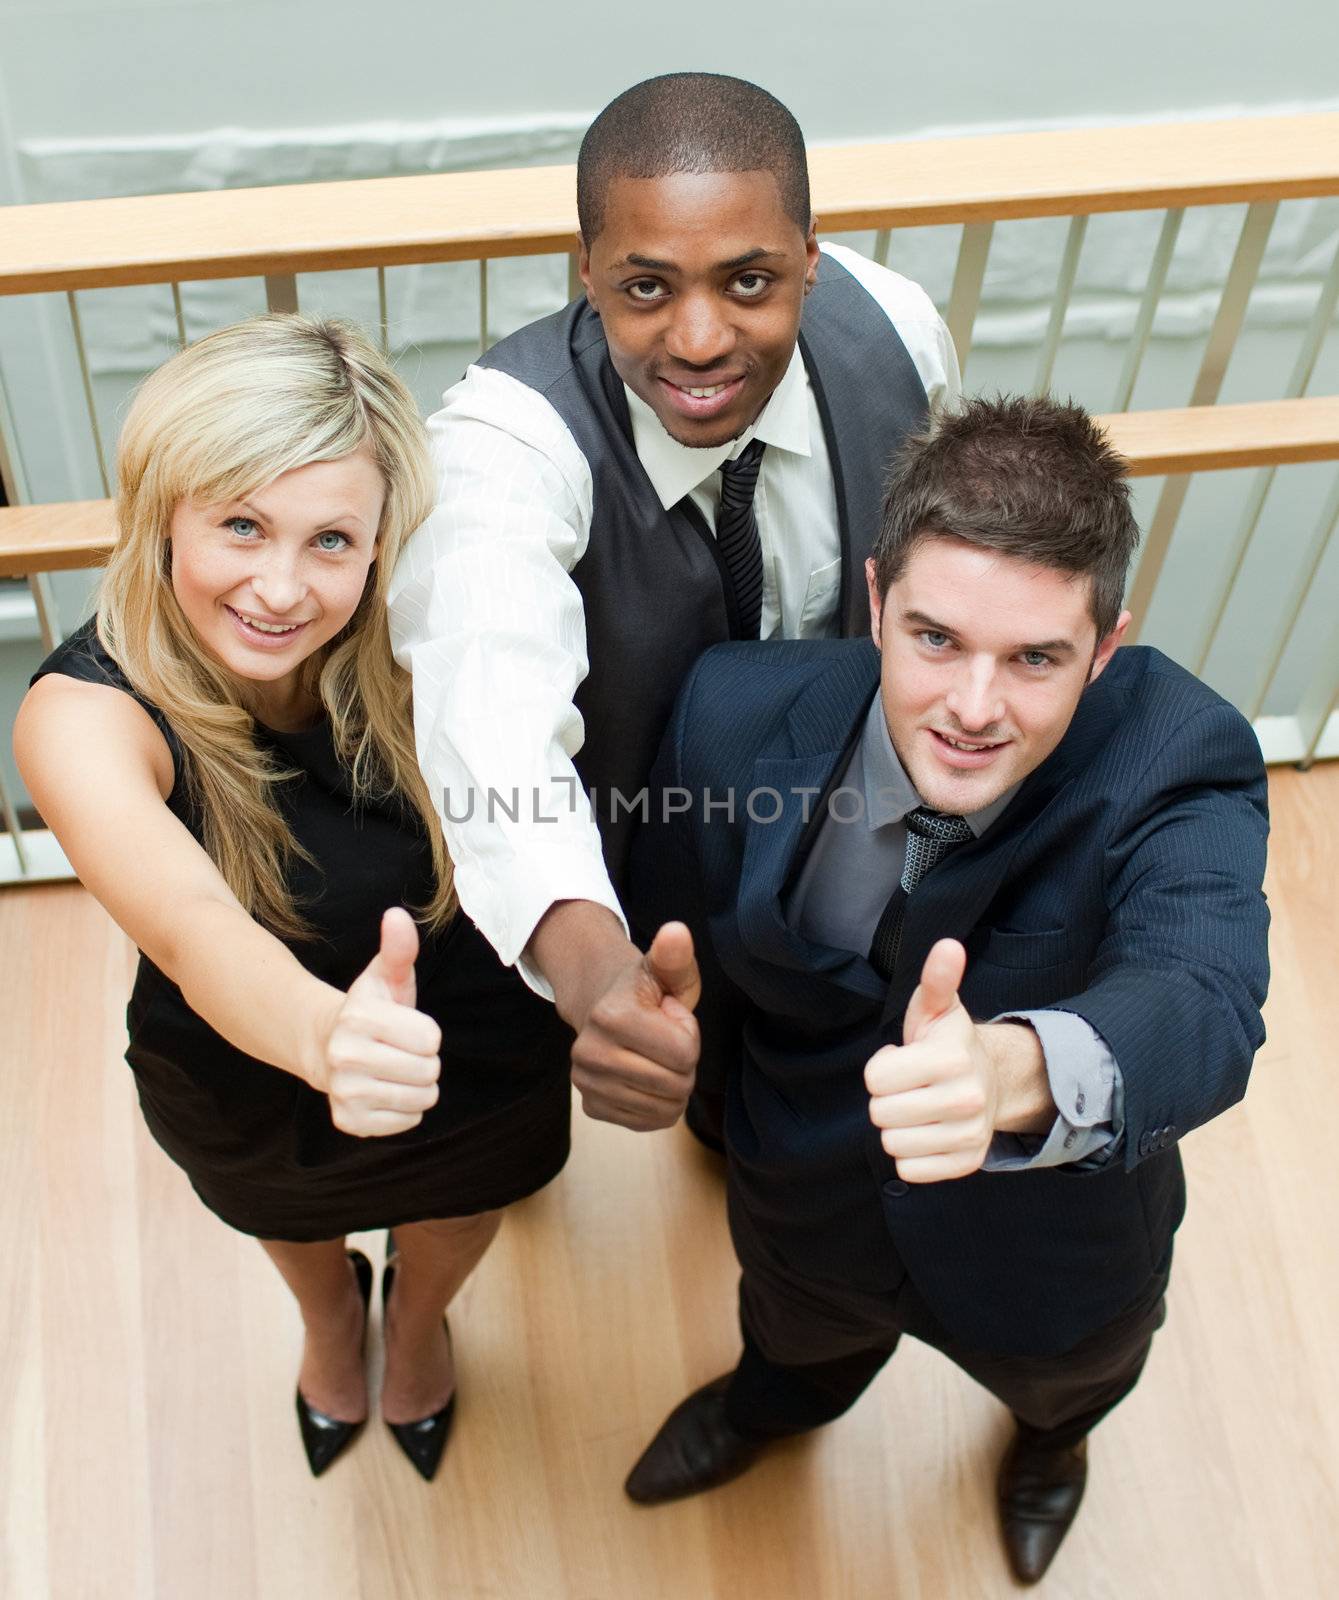 Business people on stairs with thumbs up by Wavebreakmedia